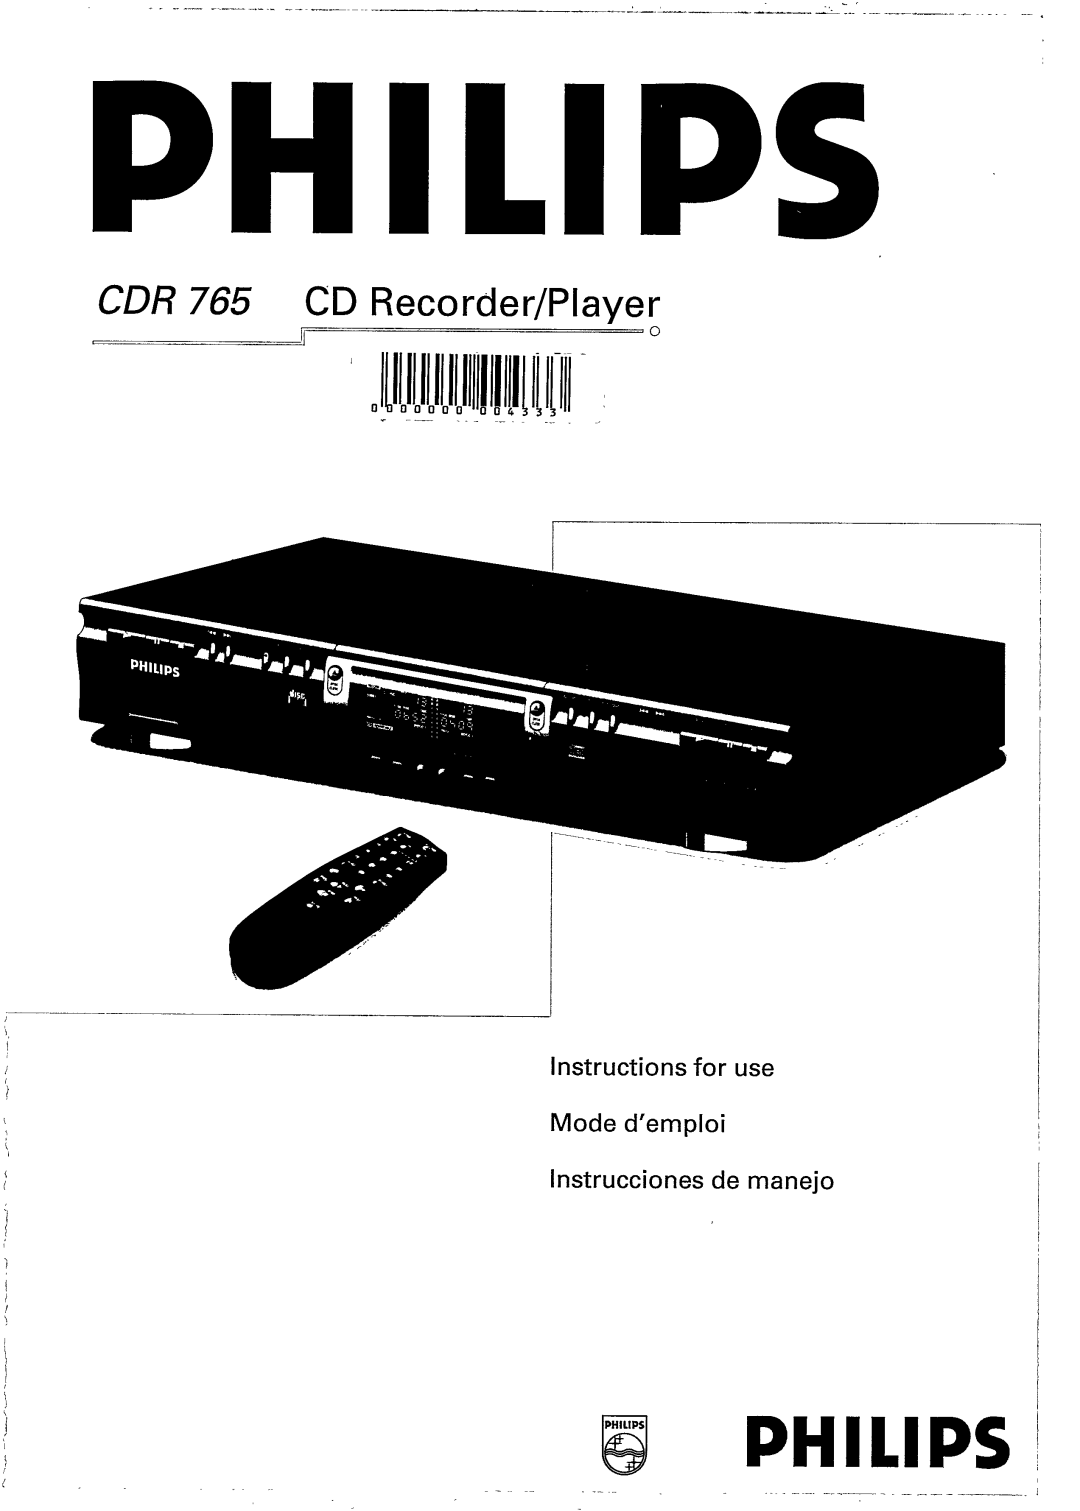 Philips CDR 765 manual 